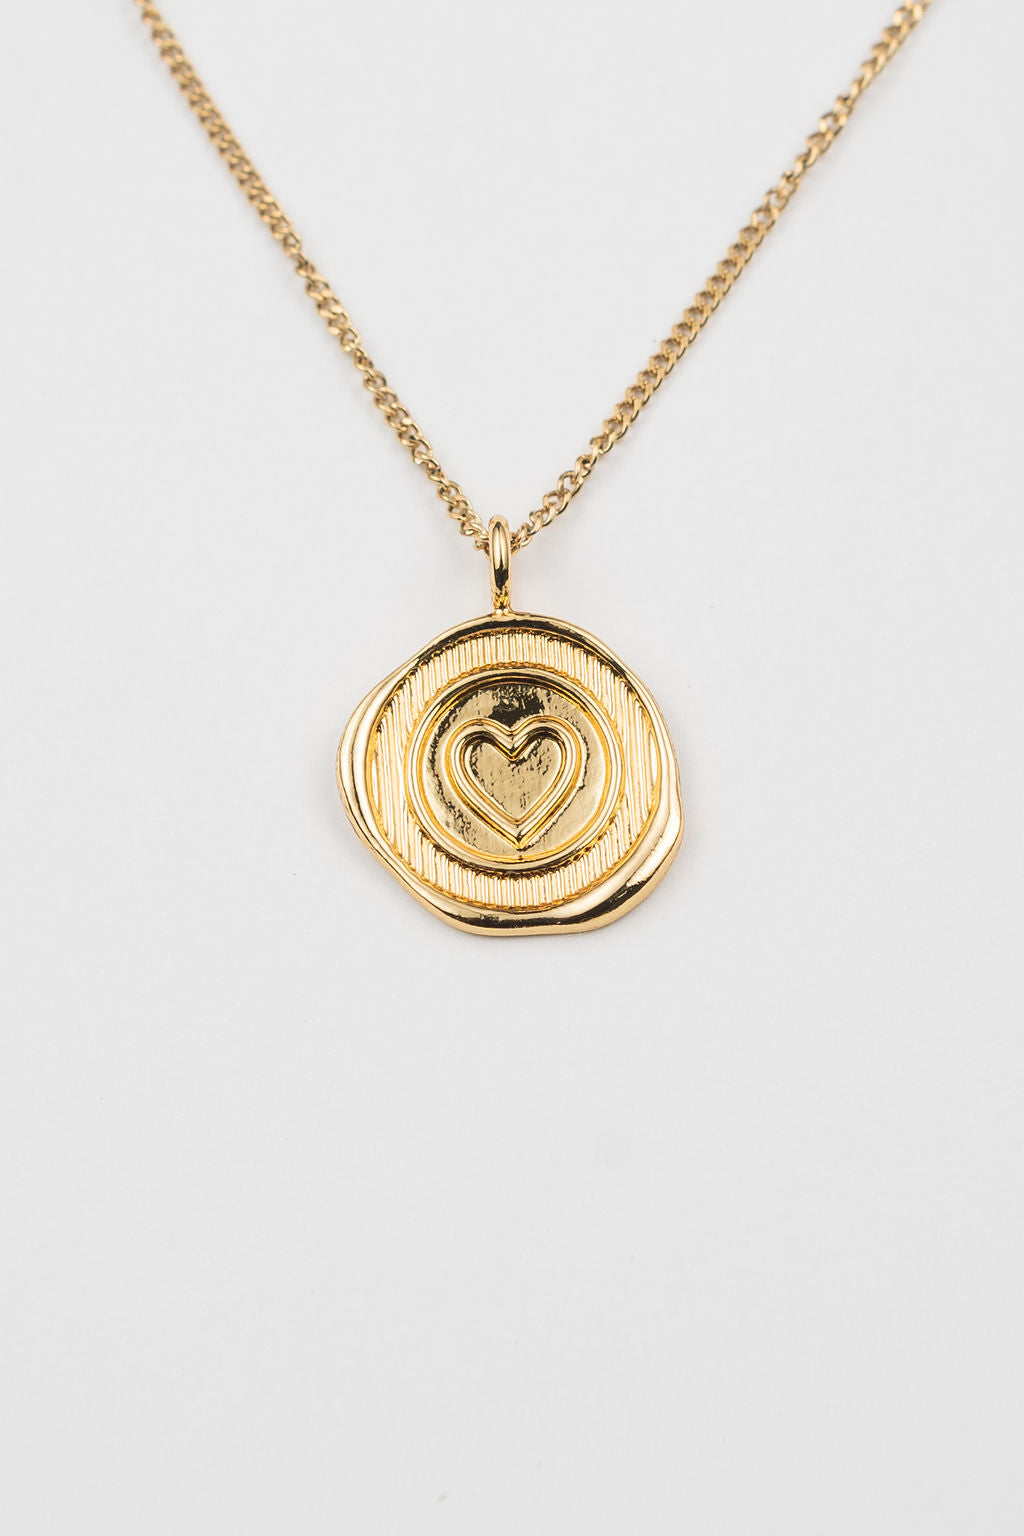 Sealed with Love Medallion